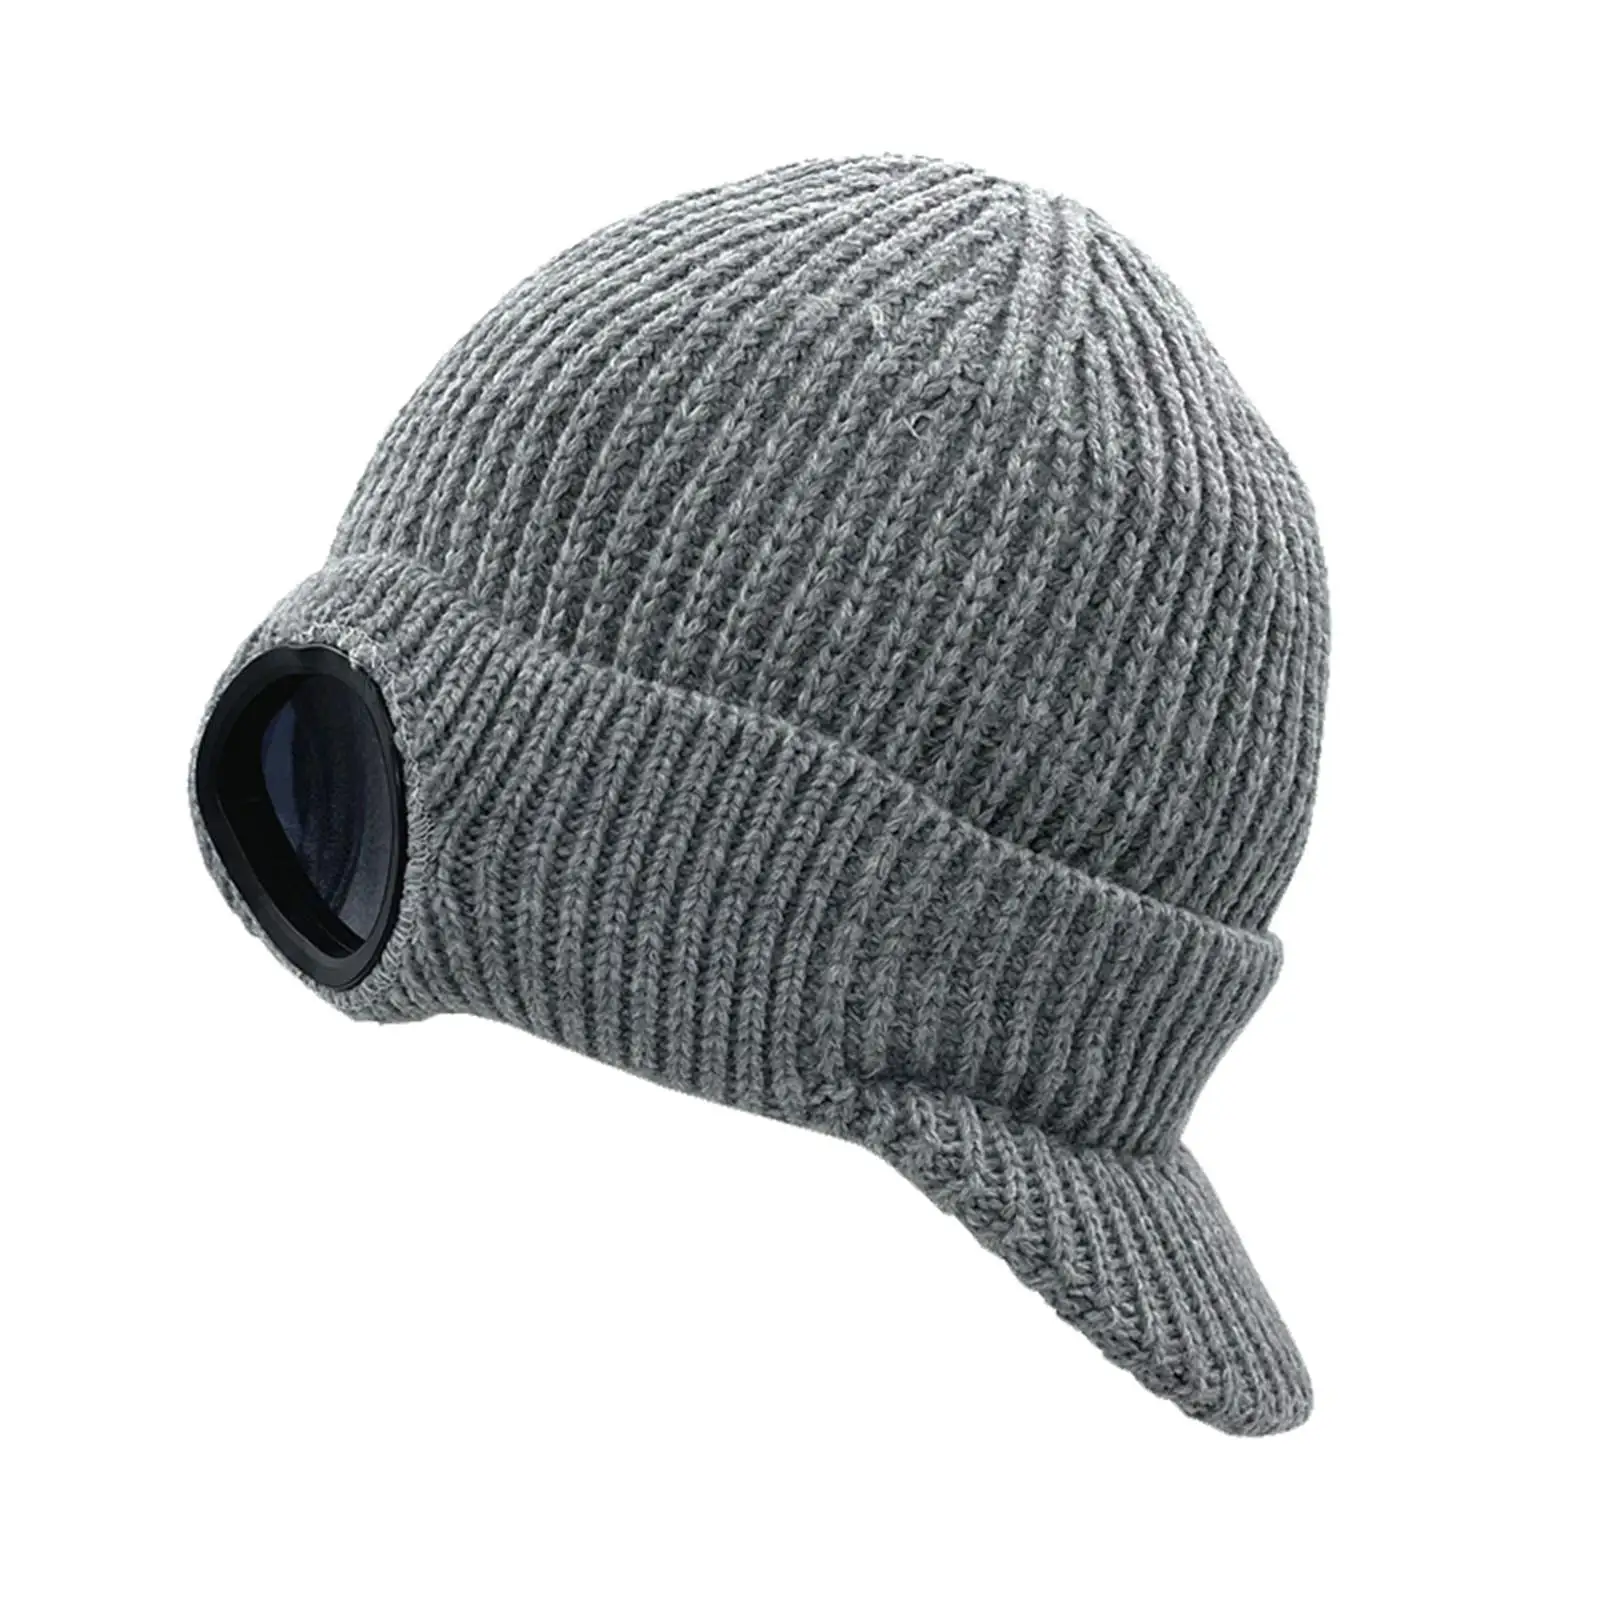 Men`s knitted newsboy hat, glasses, cap, winter, warm, windproof, peaked,